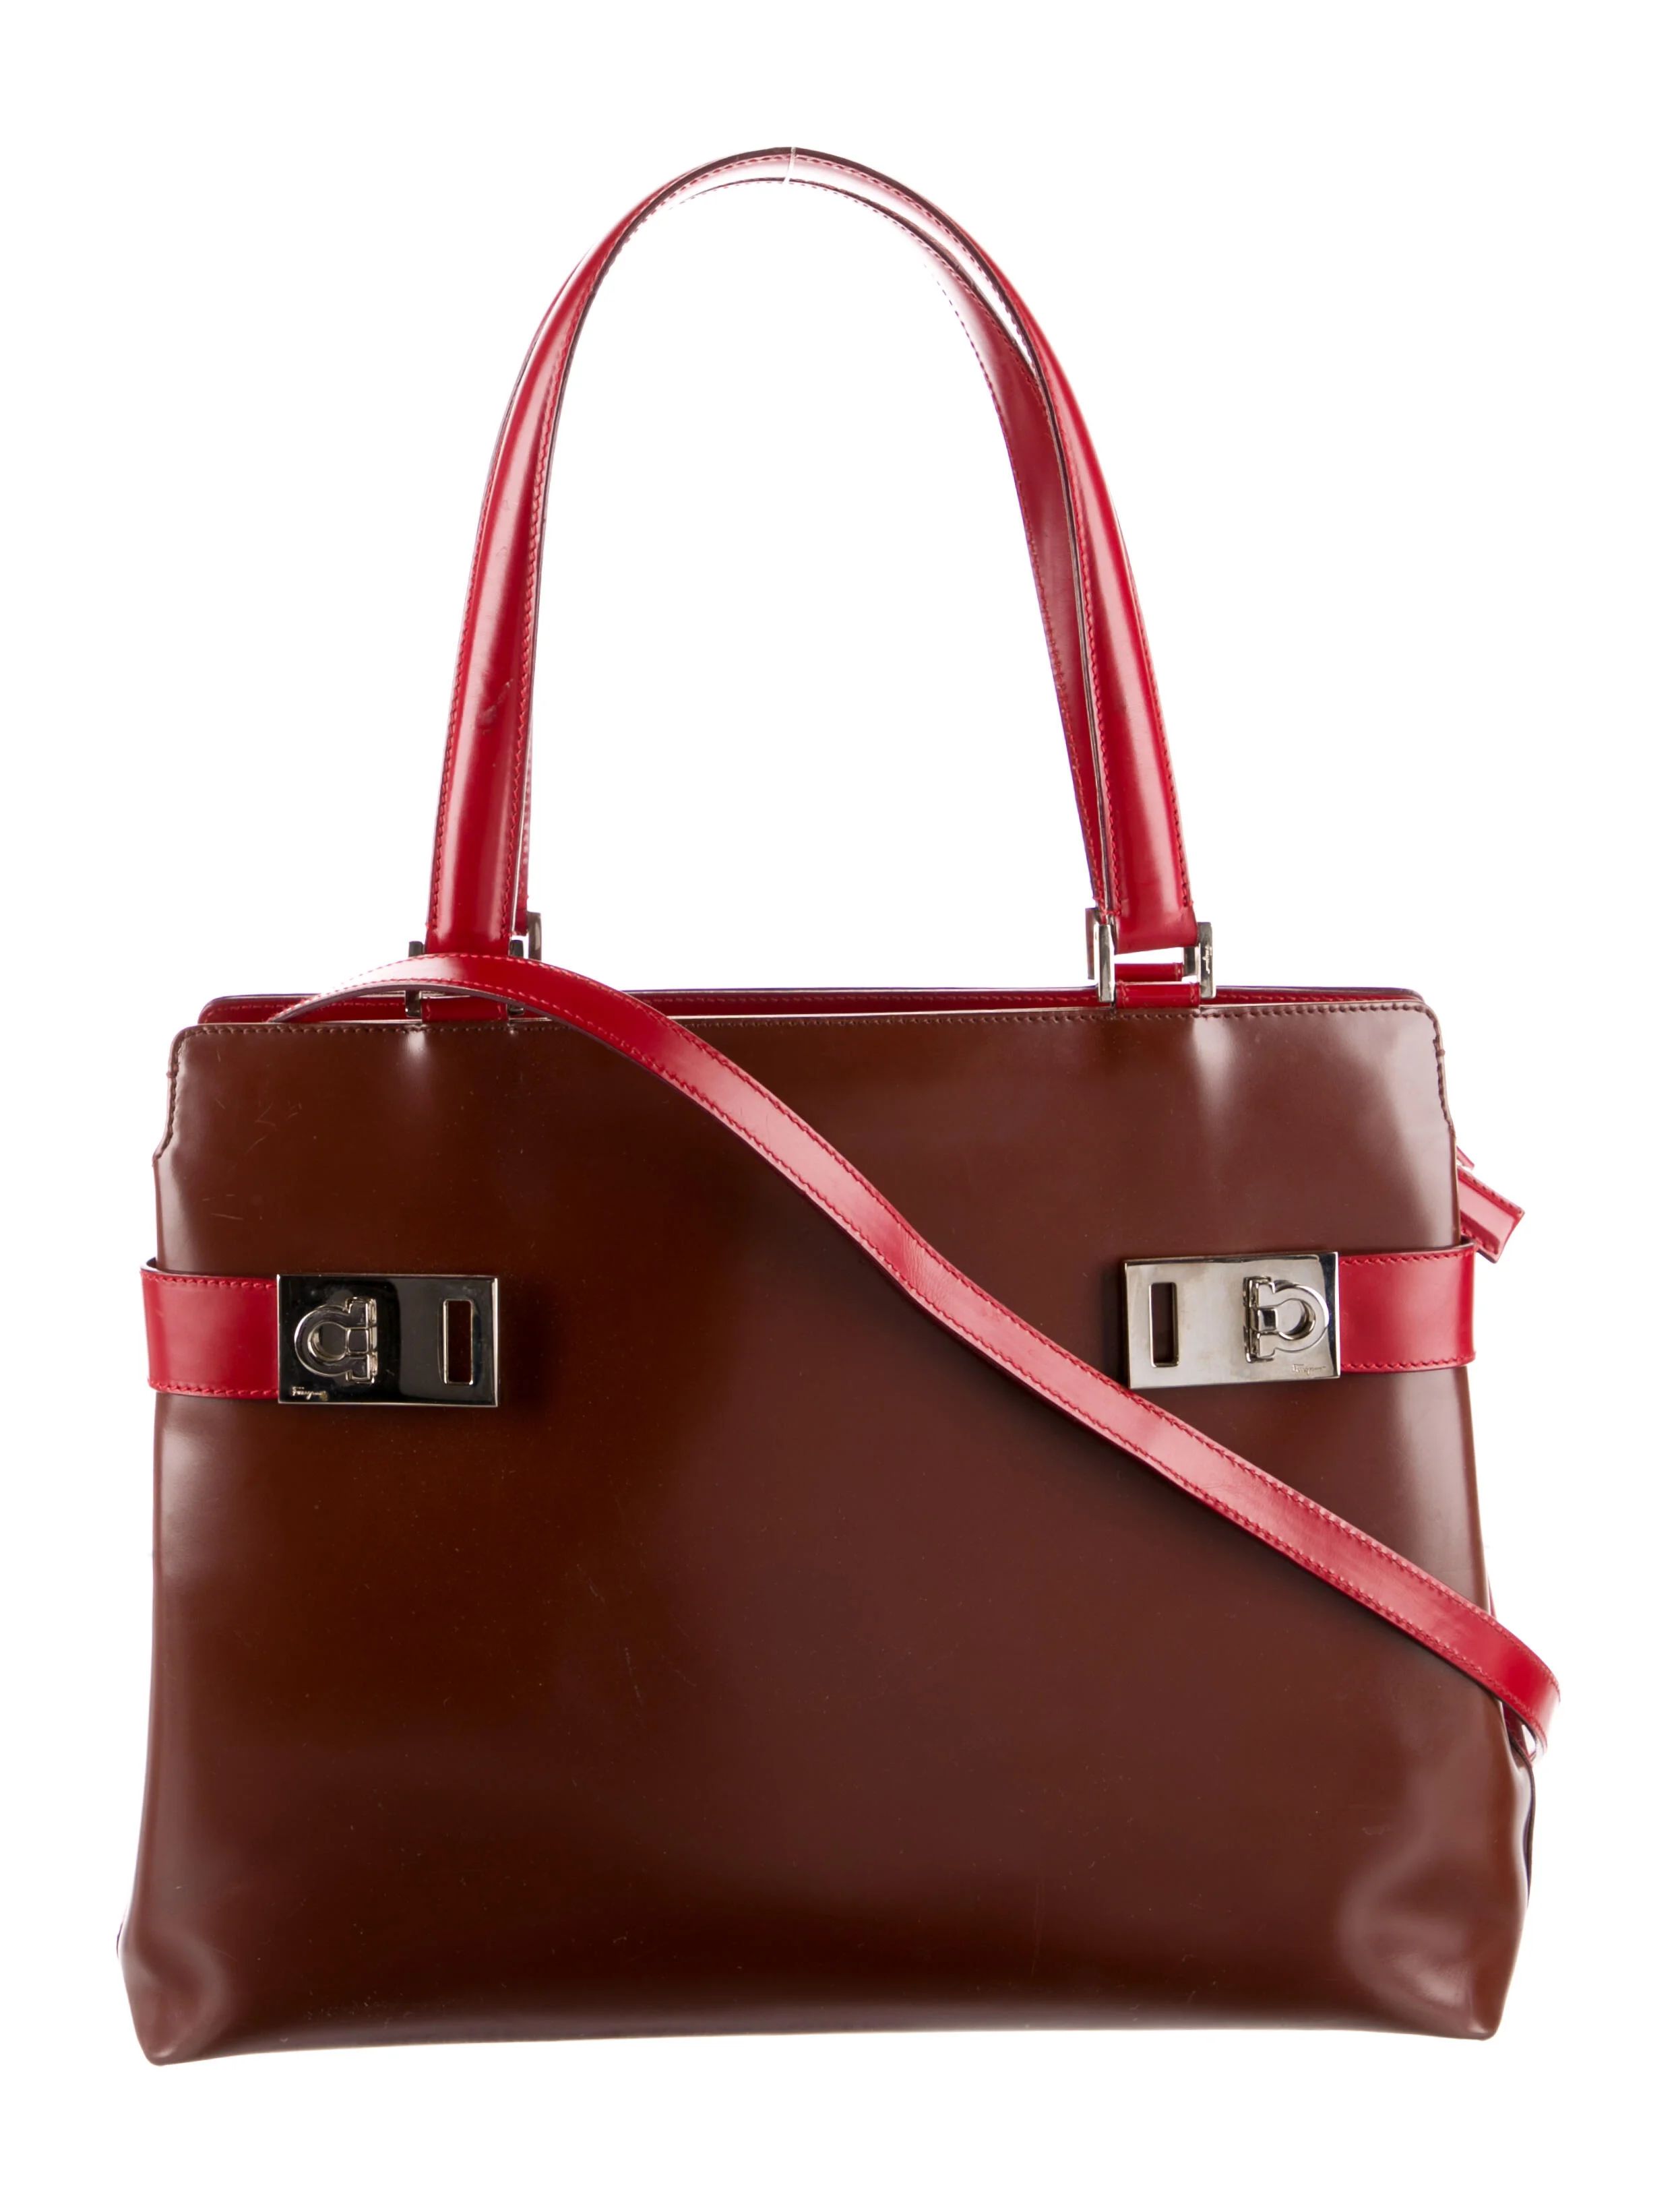 Patent Leather Tote Bag | The RealReal